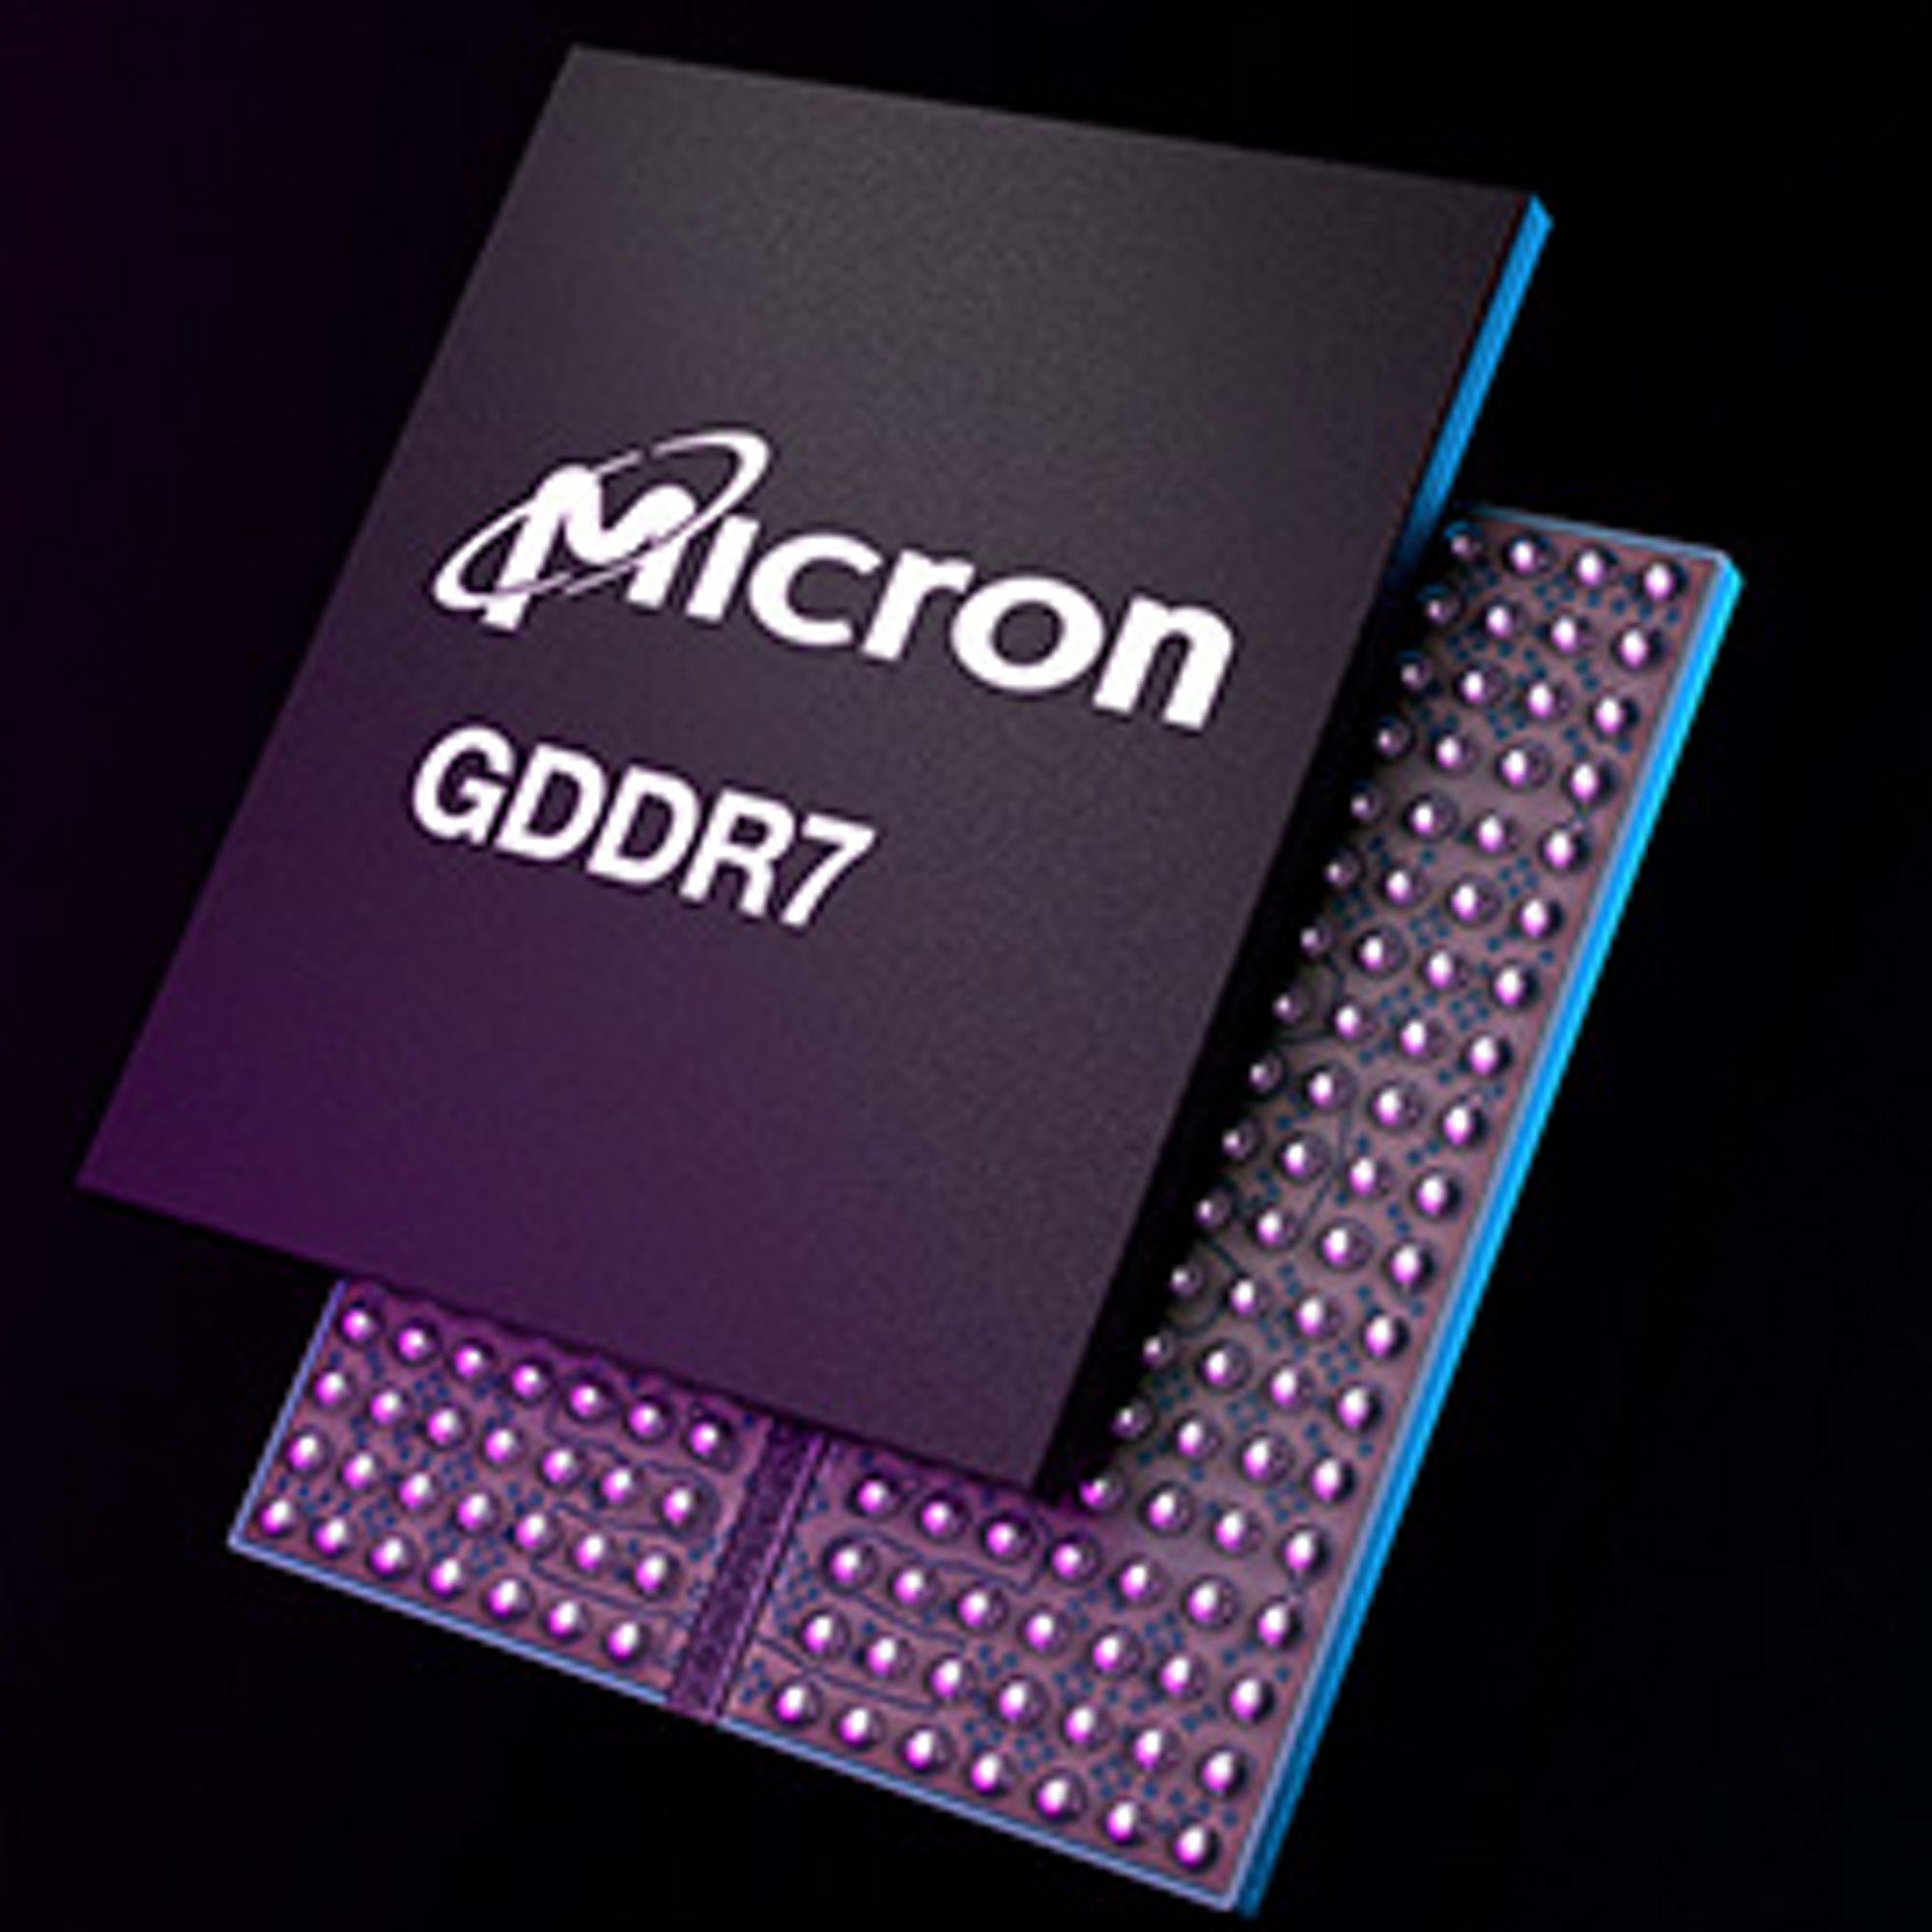 Micron GDDR7 product front and back